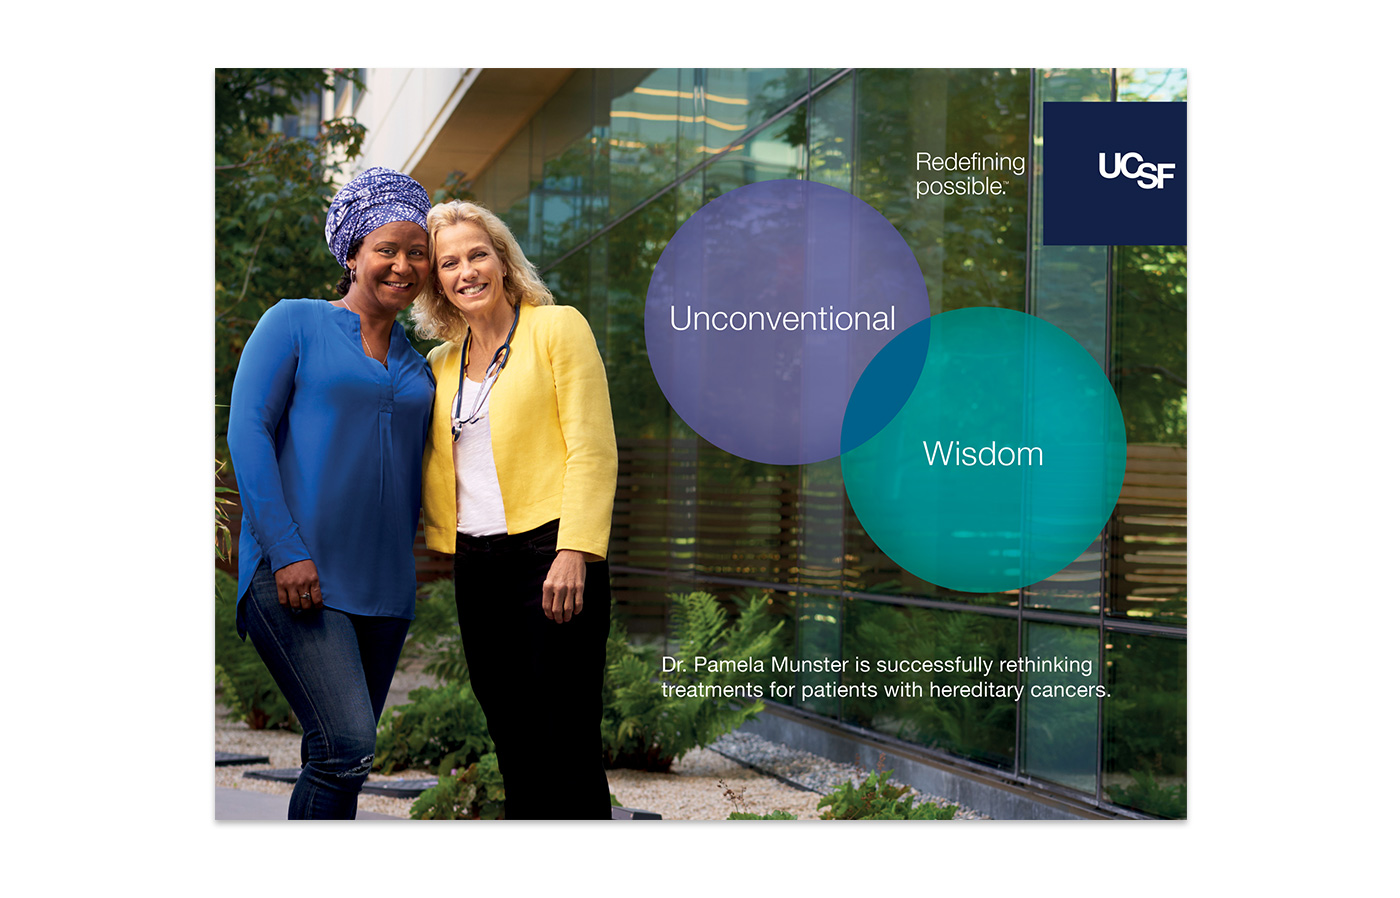 UCSF_poster1.jpg